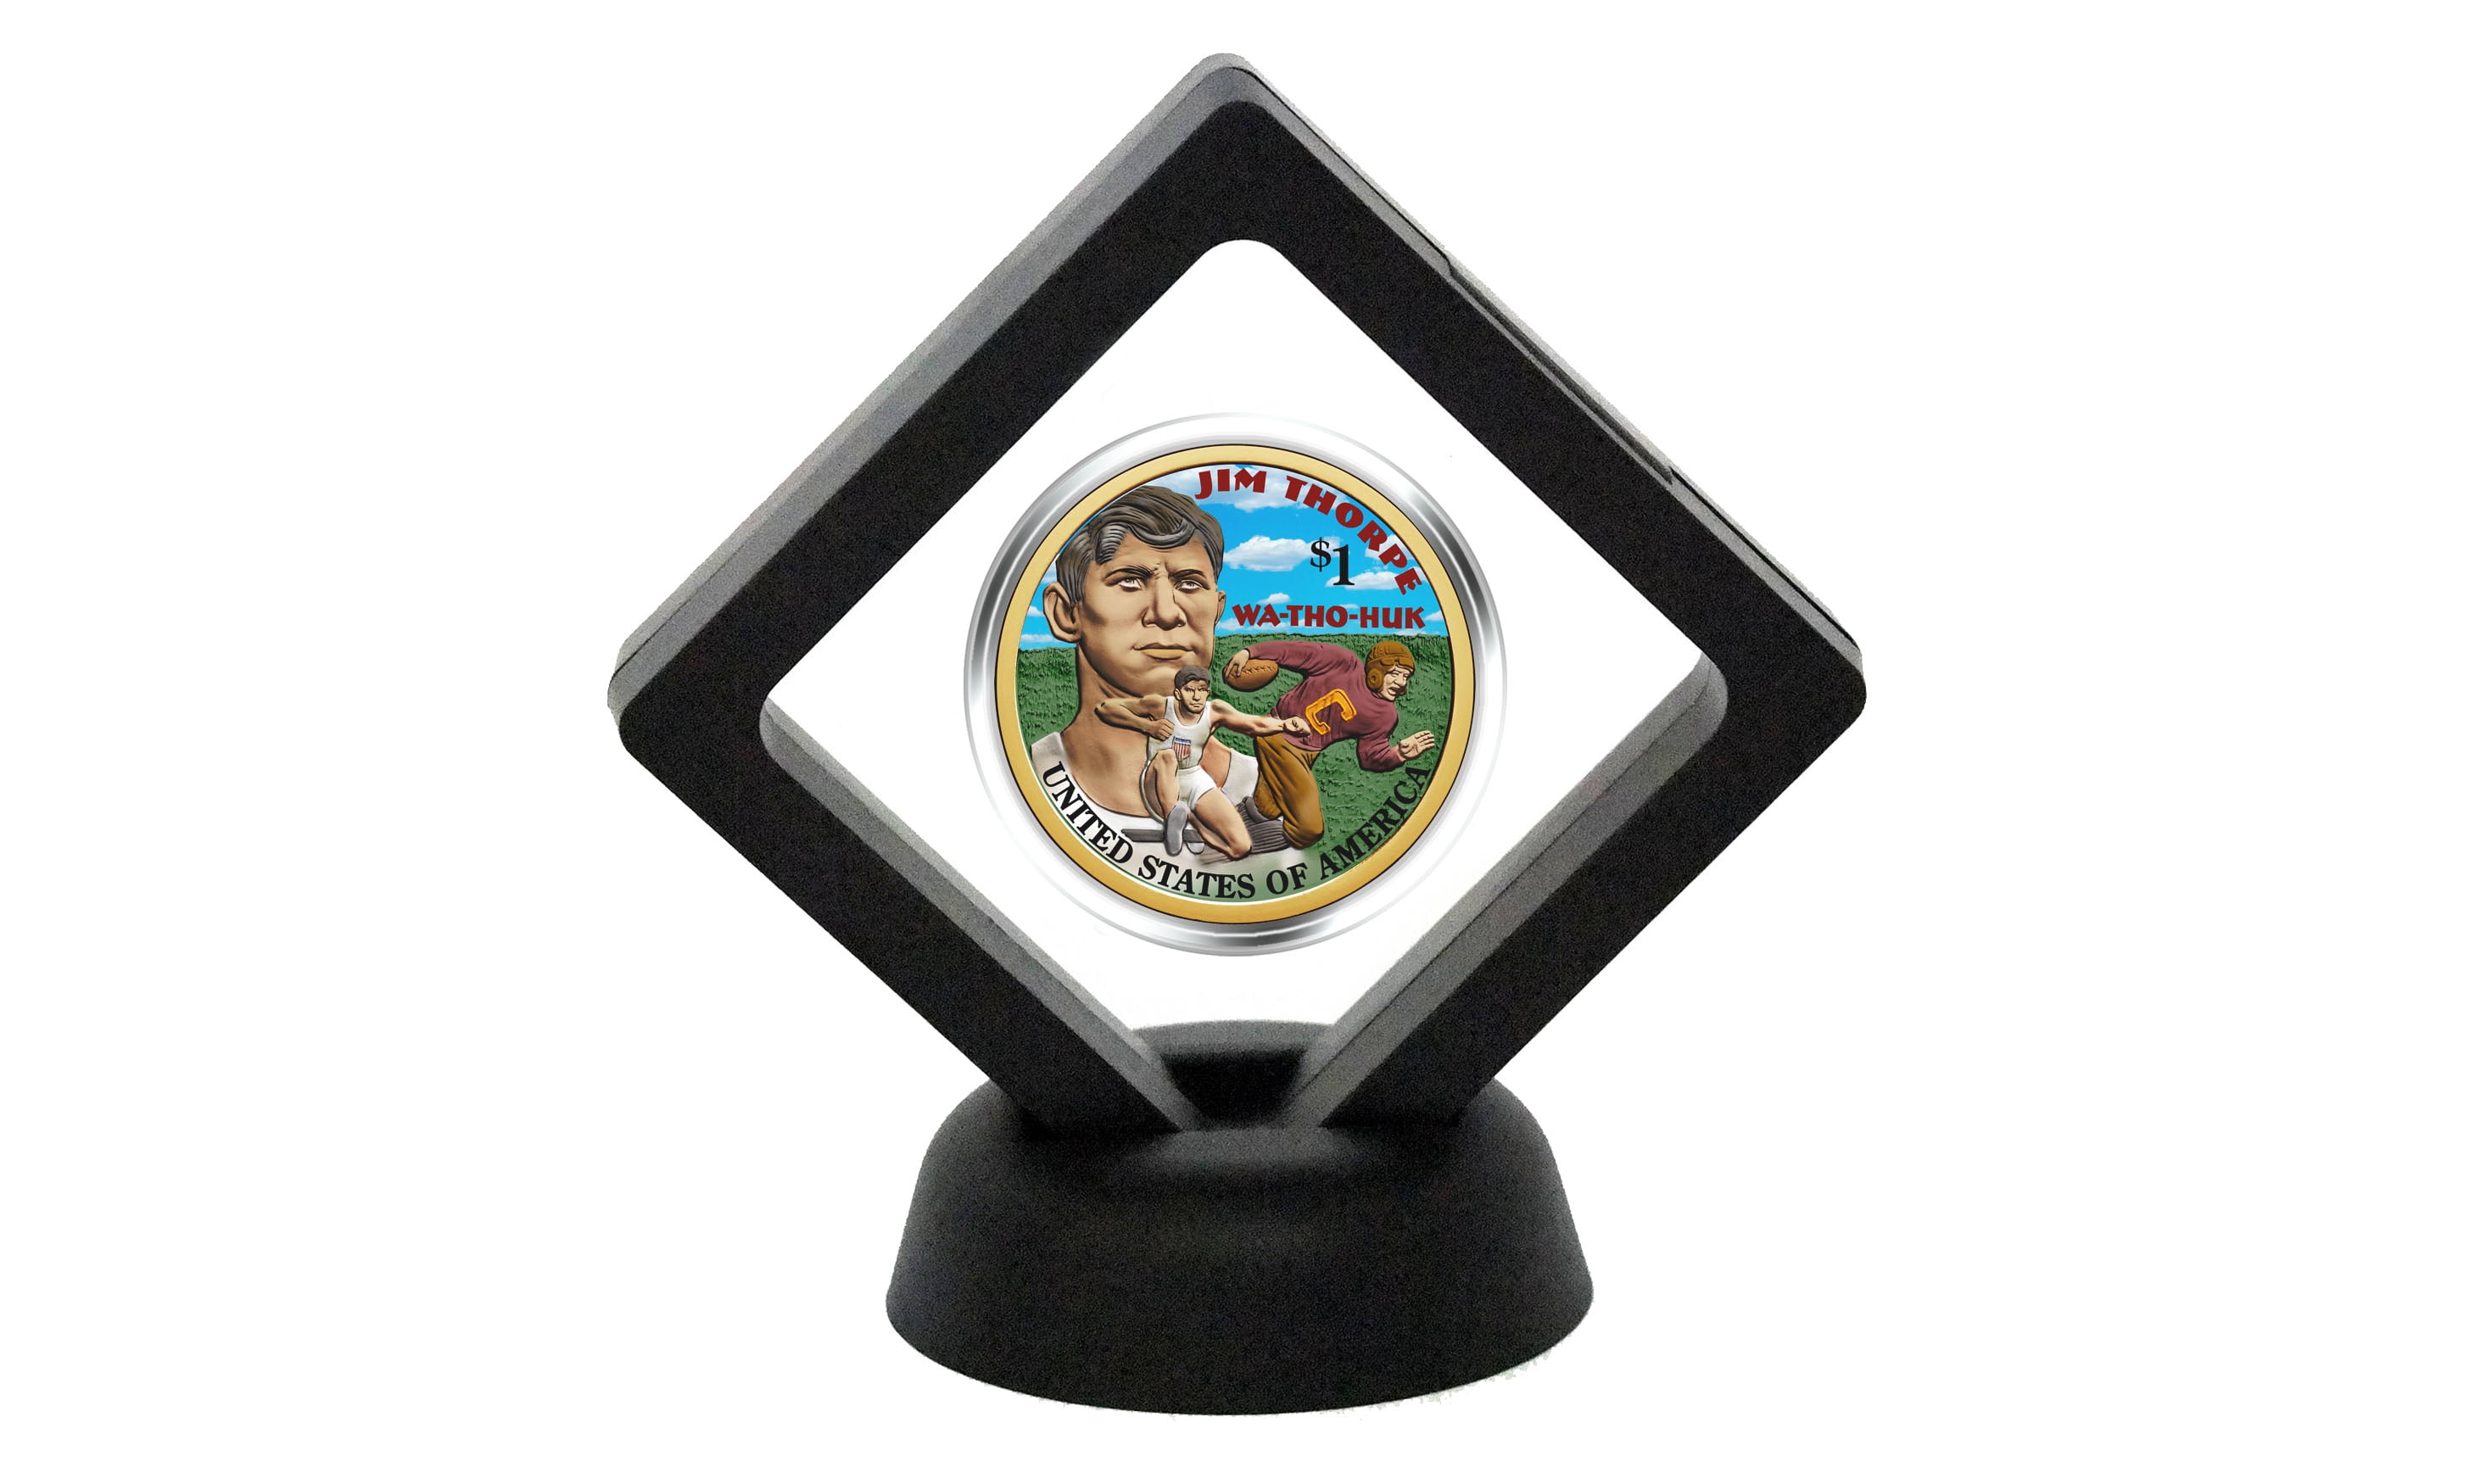 180mm*90mm*20mm 3D Floating Coin Display Frame Holder Box Case Black With Stand 